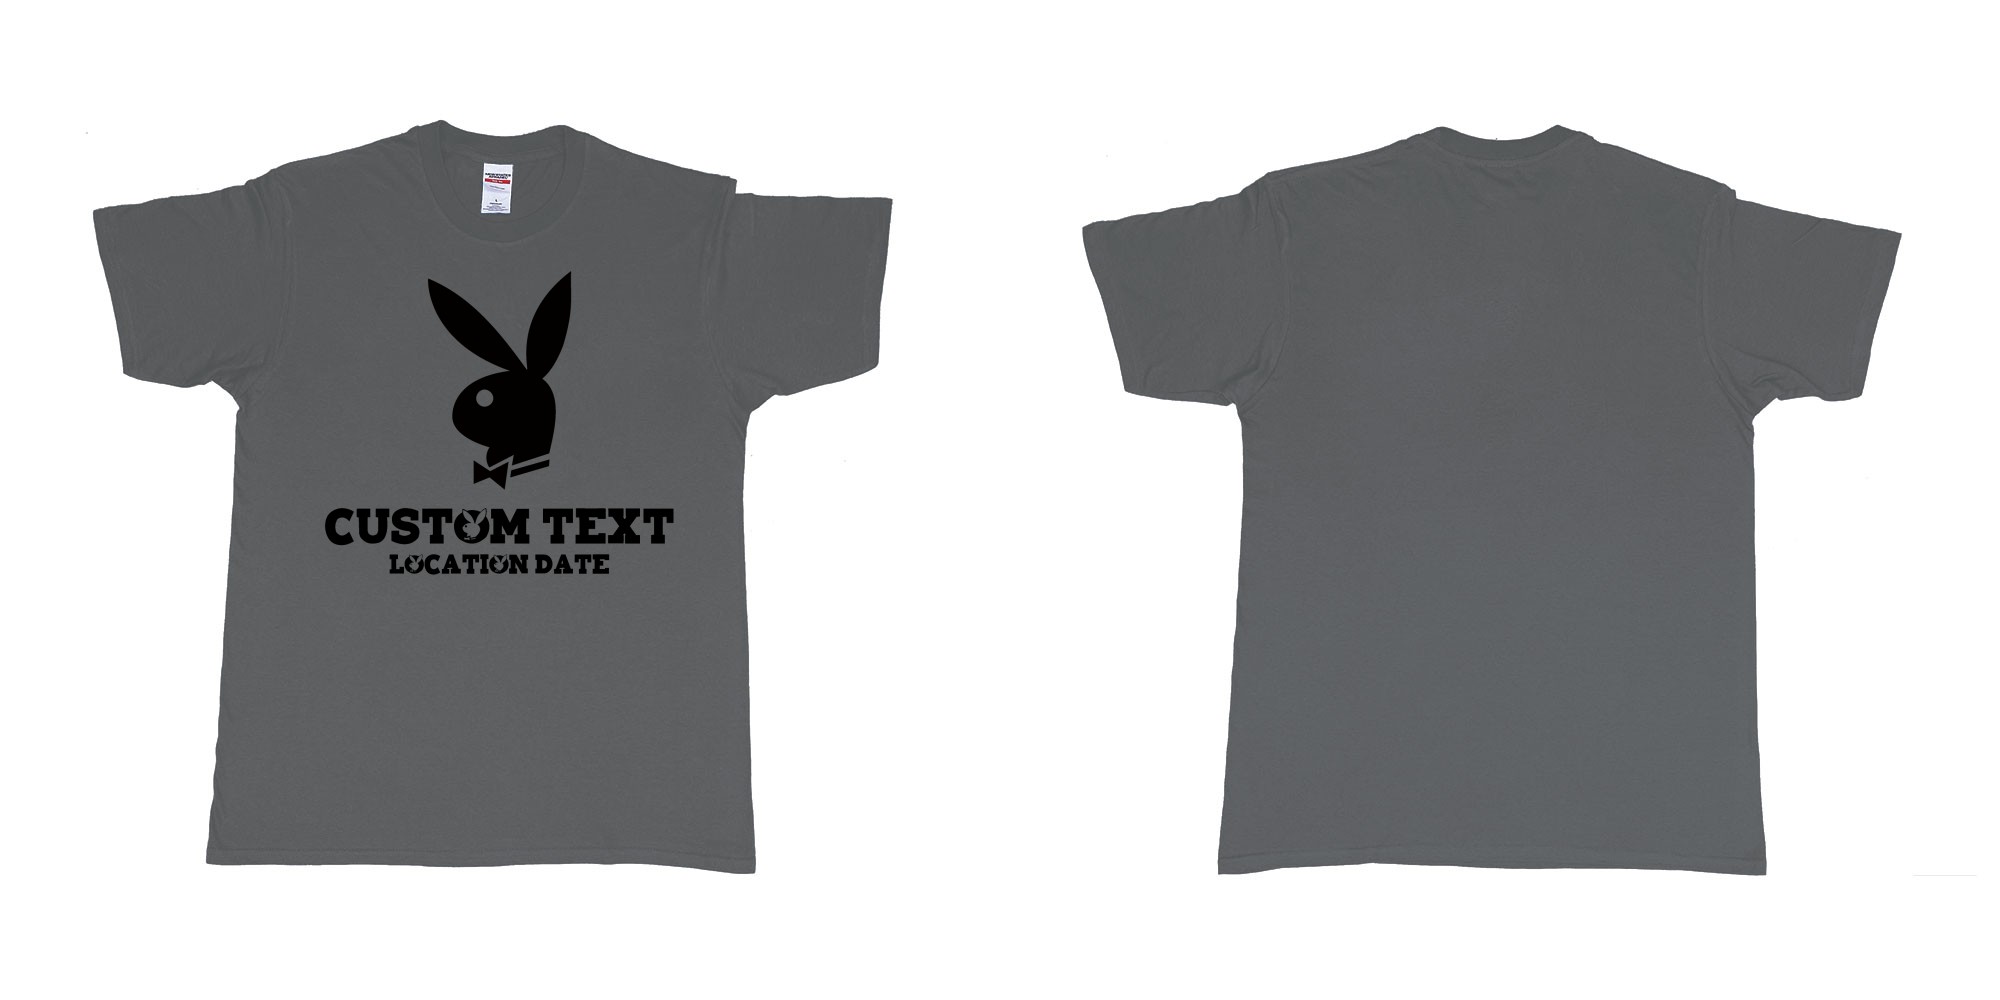 Custom tshirt design playboy playgirl custom text tshirt in fabric color charcoal choice your own text made in Bali by The Pirate Way